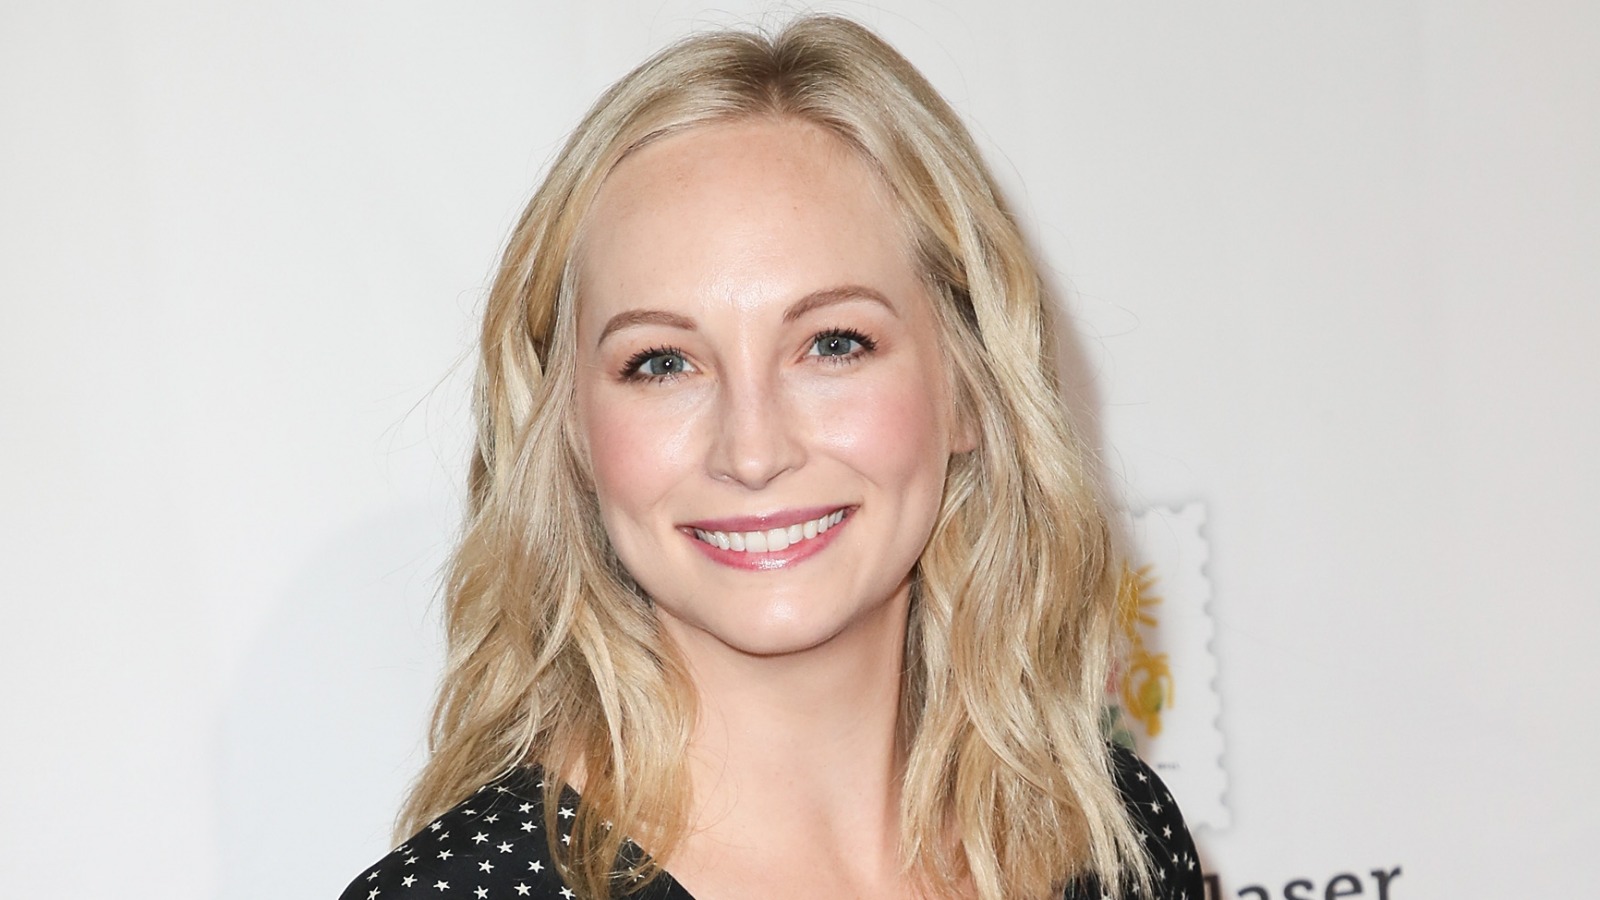 Here's How Vampire Diaries Is Handling Candice King's Pregnancy